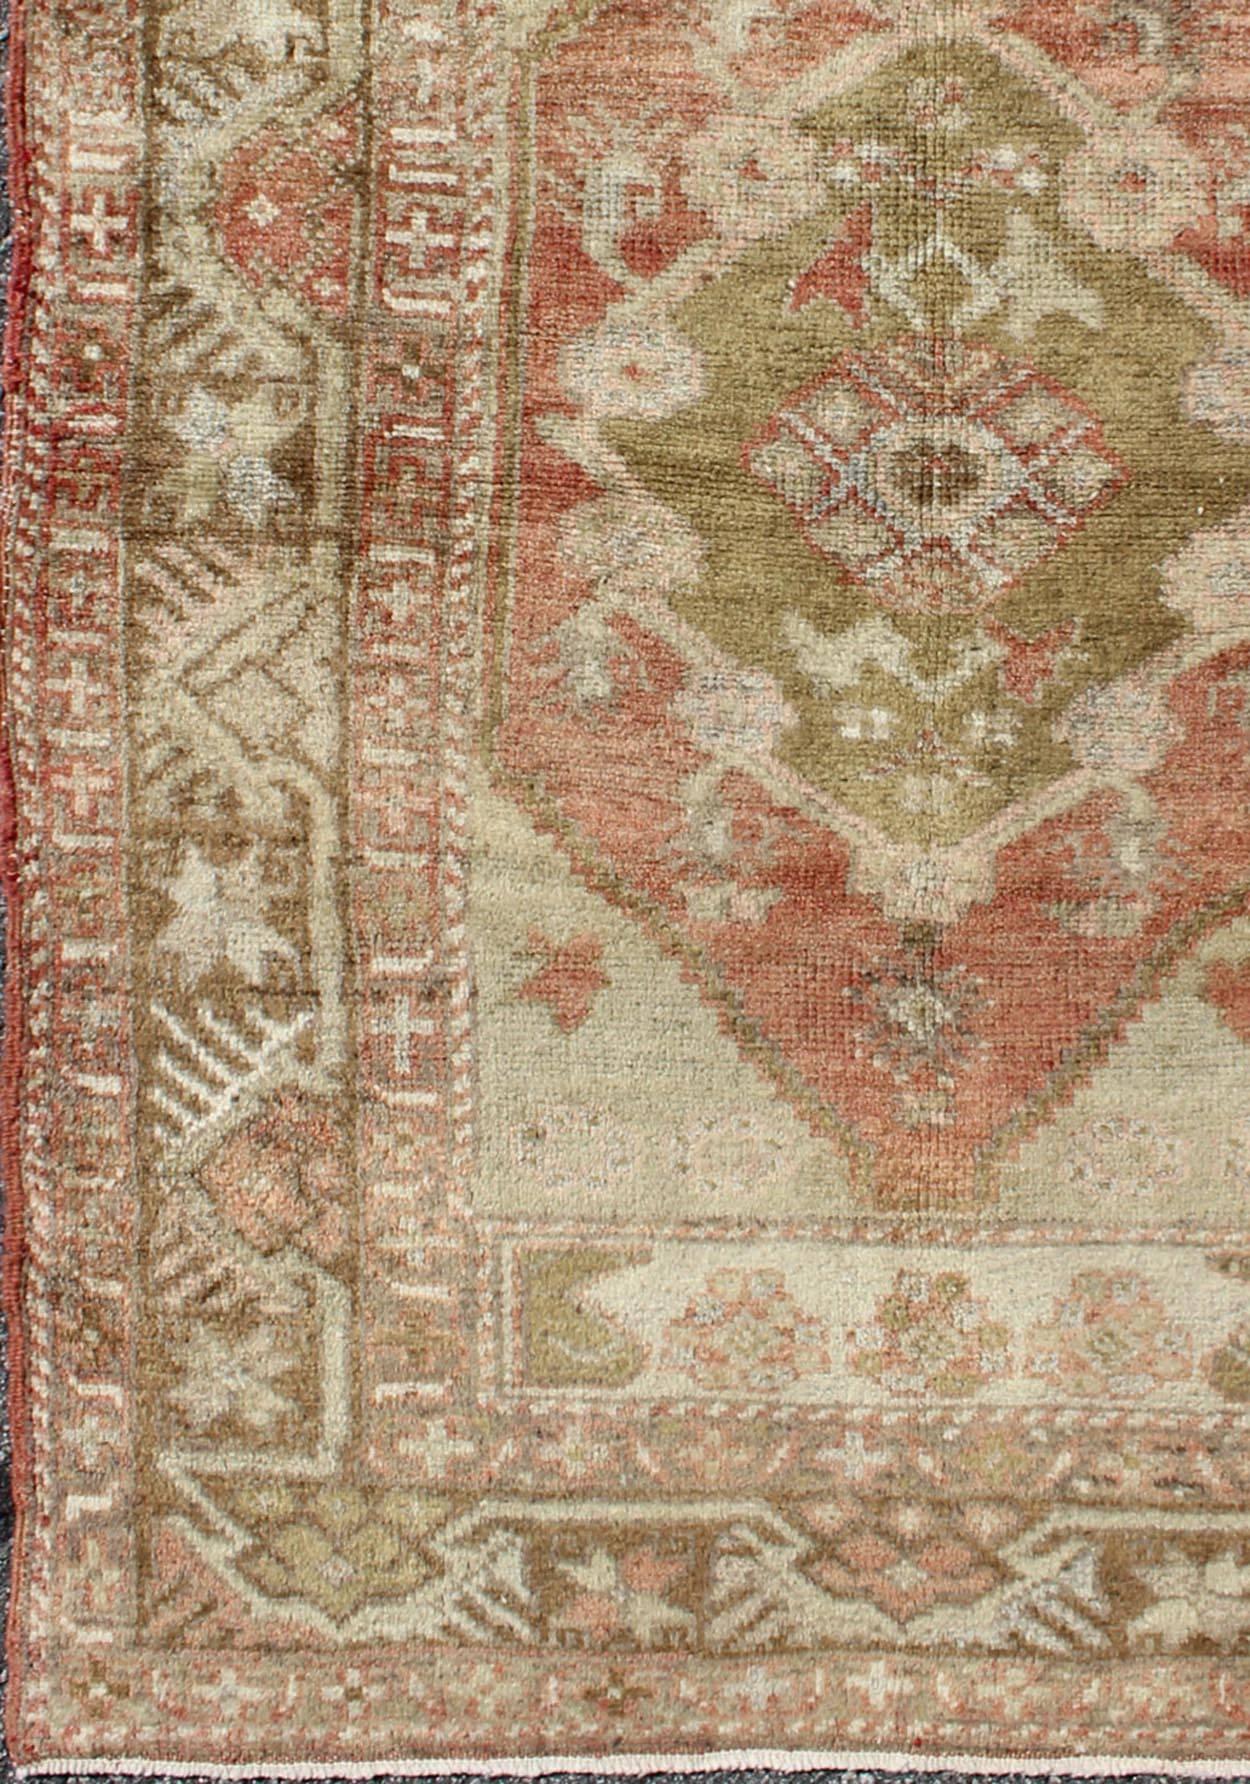 Oushak Vintage from Turkey rug with medallion and ornate borders in green and red, rug isa-5, country of origin / type: Turkey / Oushak, circa mid-20th century.

This vintage Turkish Oushak carpet (circa mid-20th century) features a central